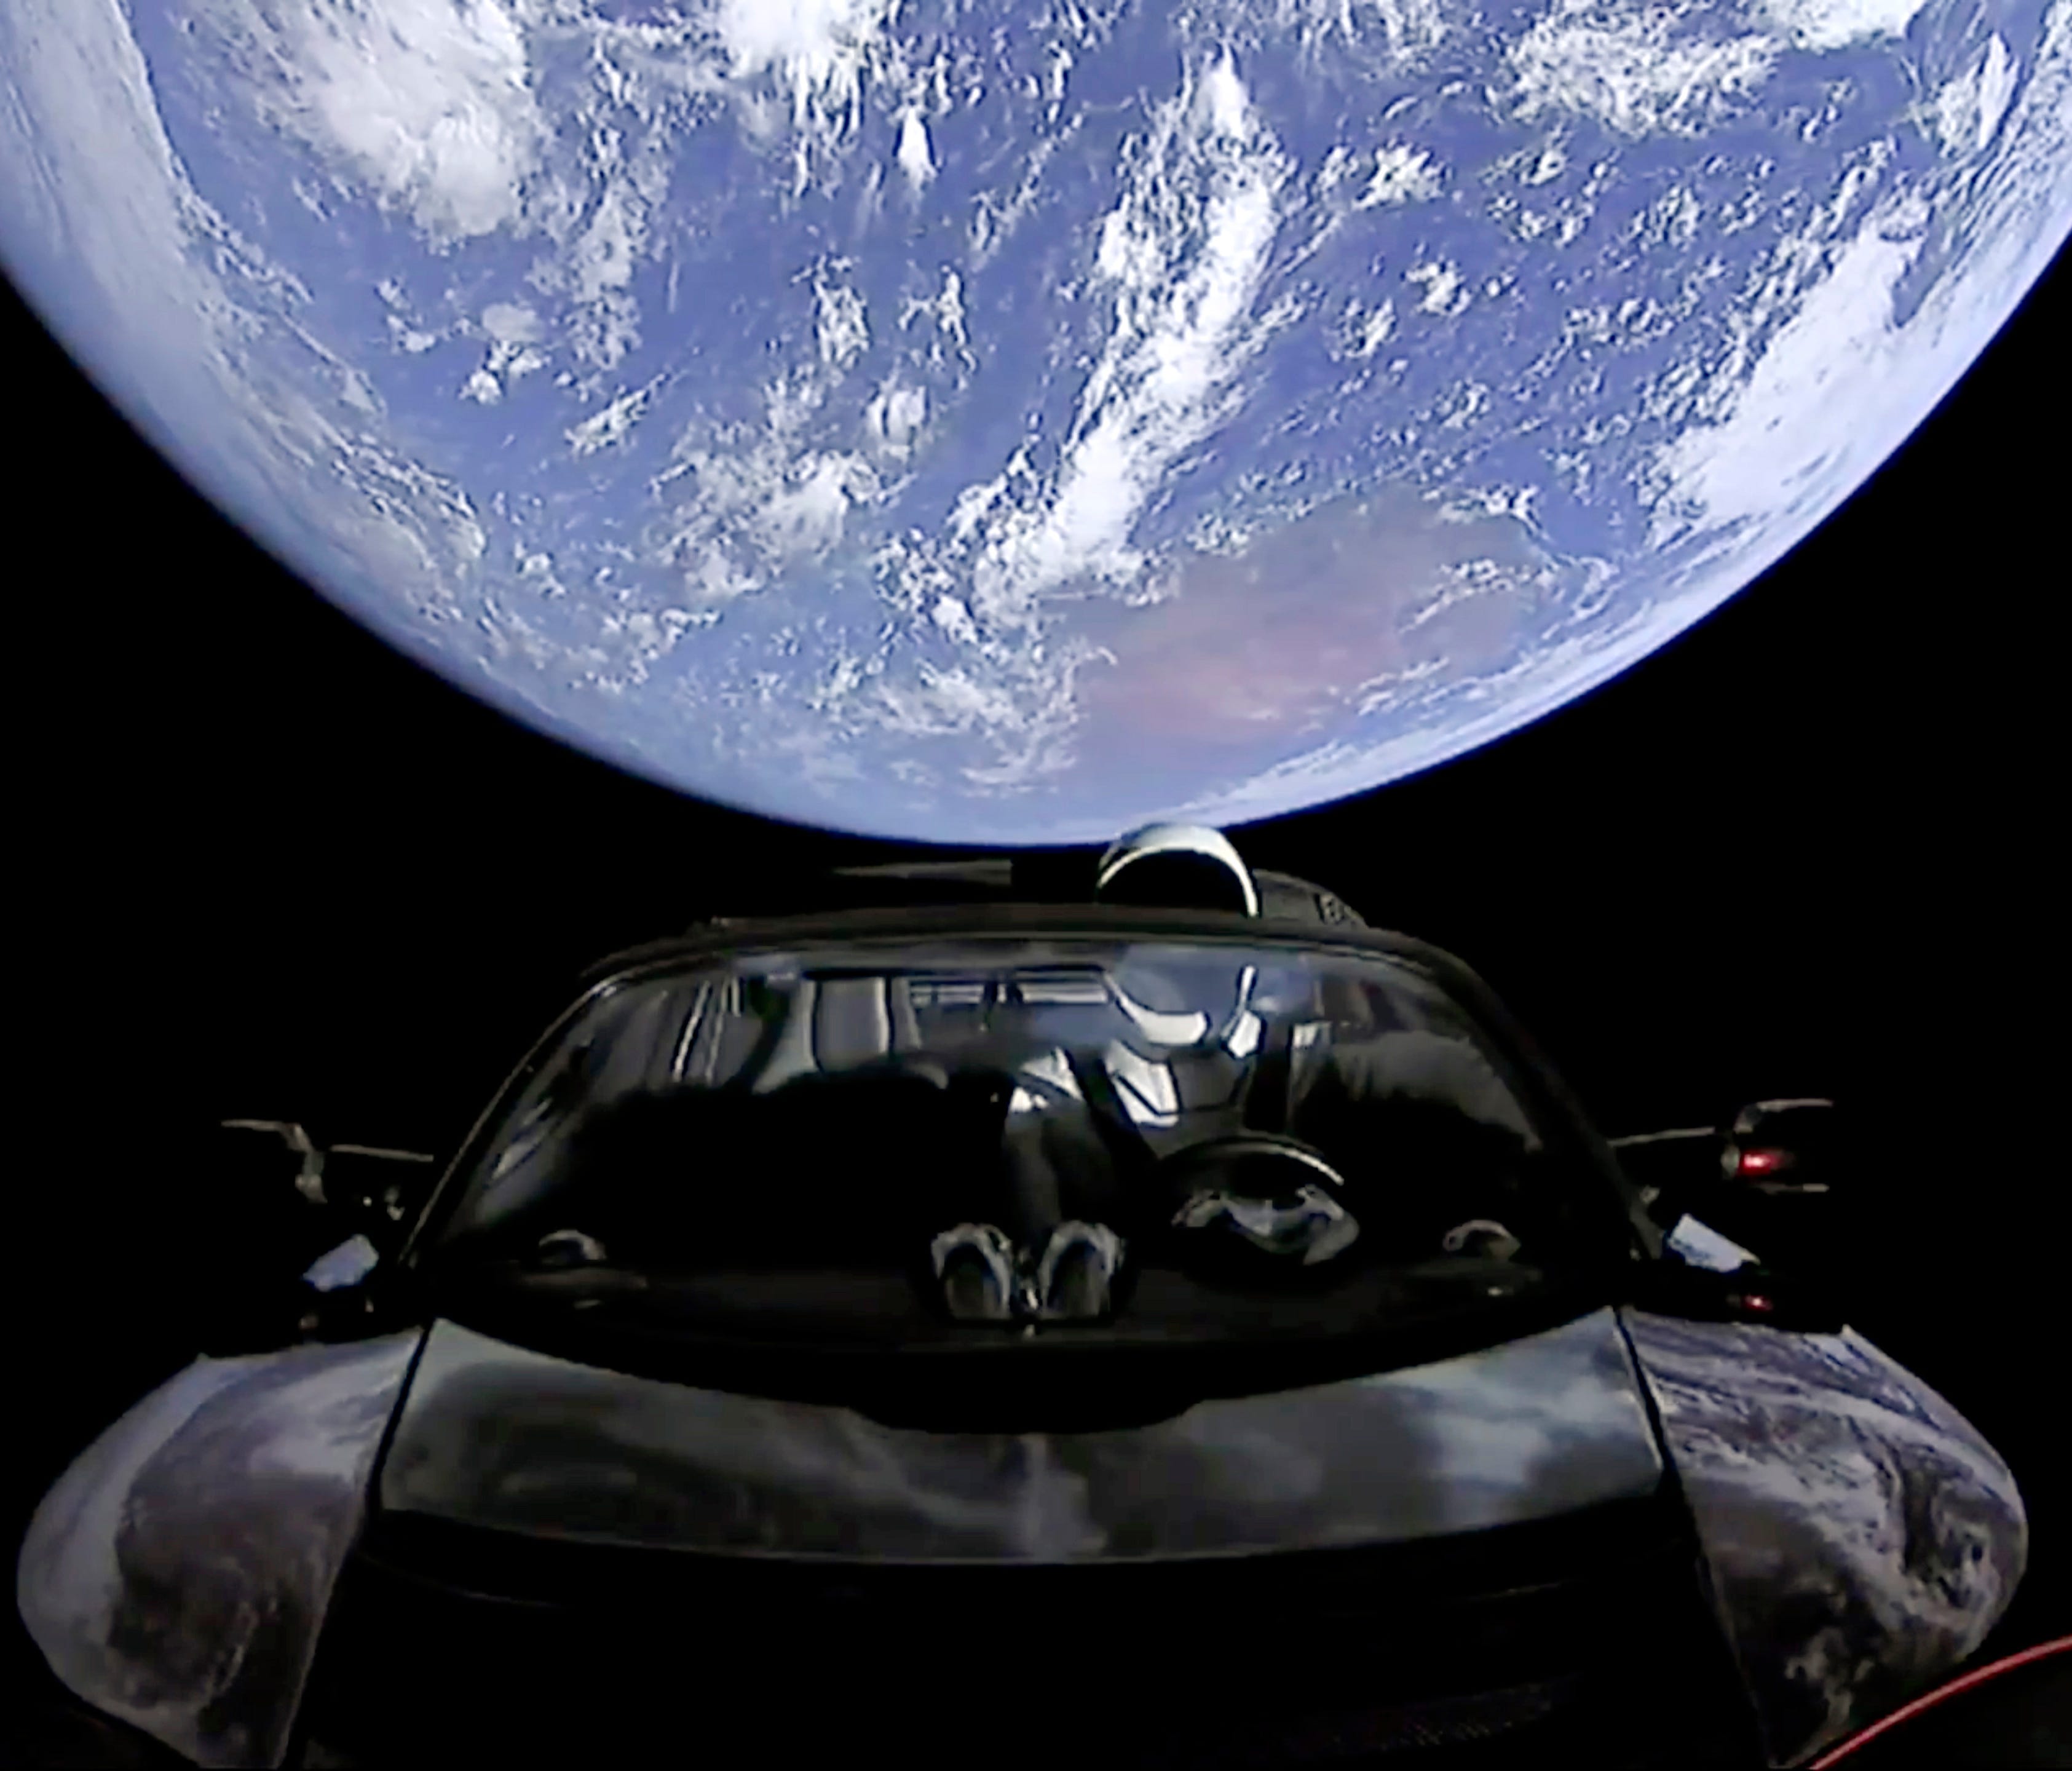 This image from video provided by SpaceX shows the company's spacesuit in Elon Musk's red Tesla sports car which was launched into space.